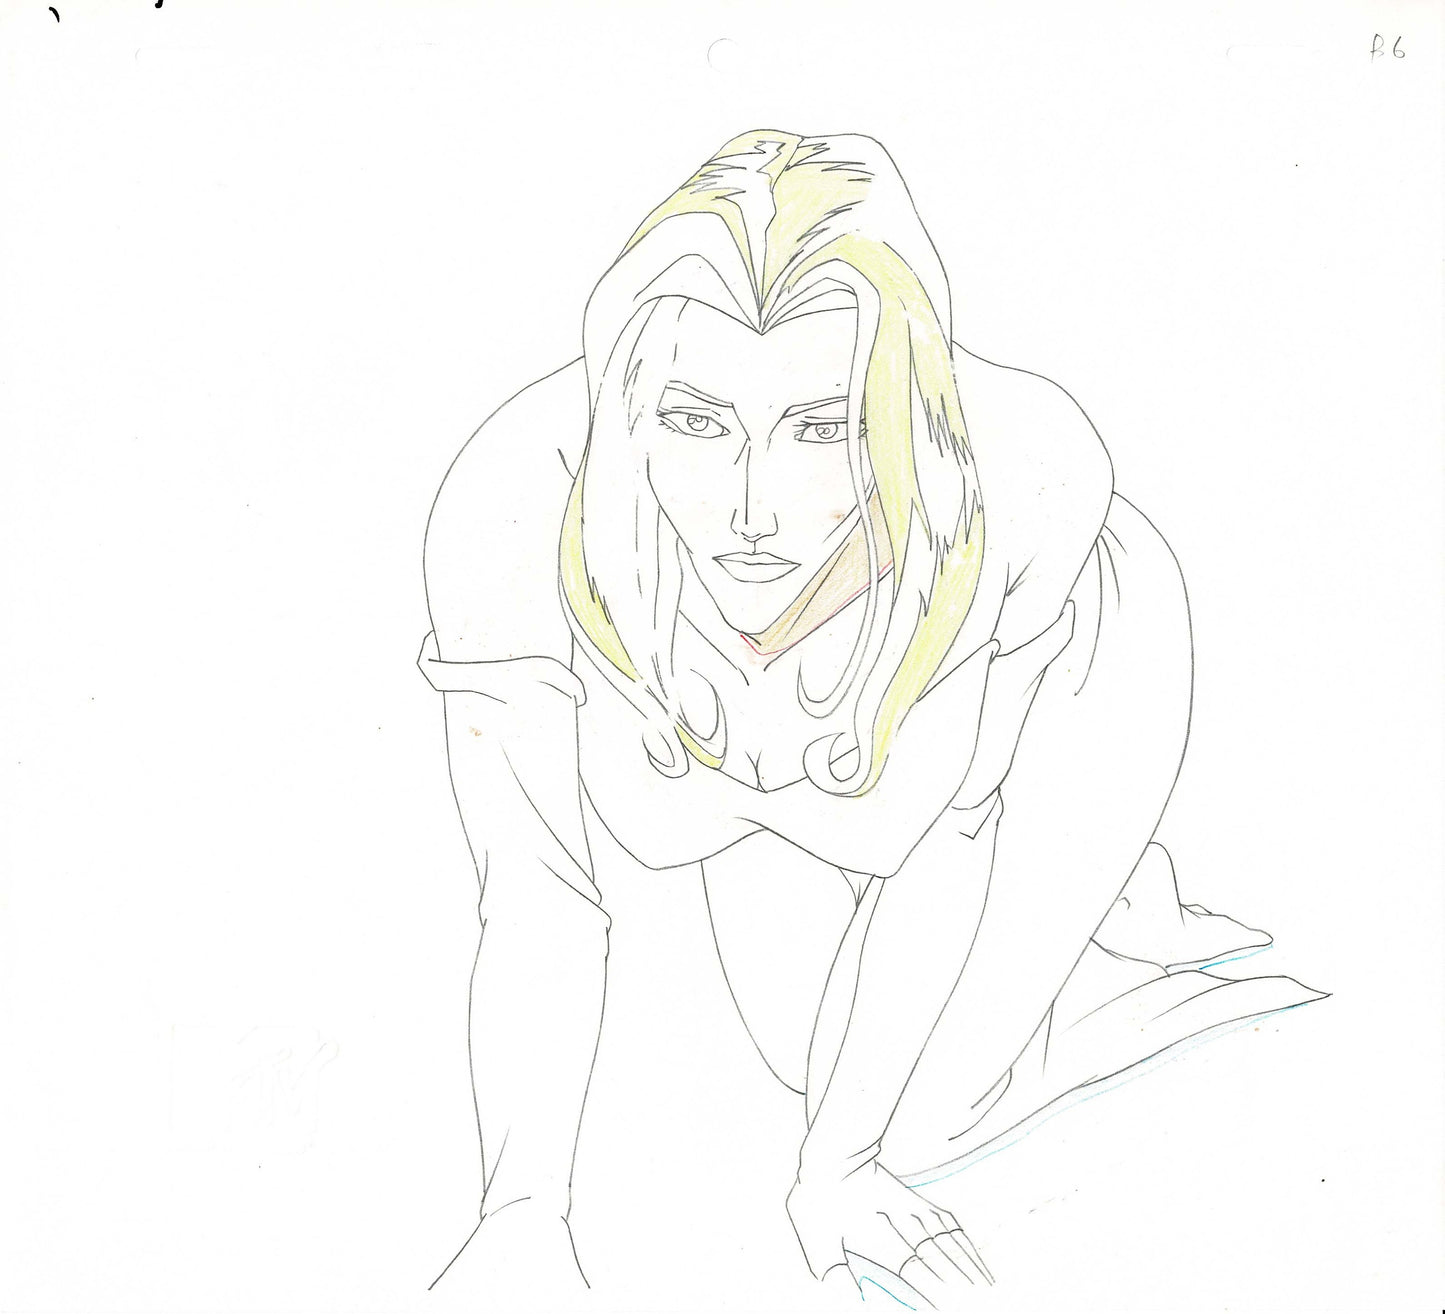 Aeon Flux Original Production Animation Cel Drawing from MTV 1991-1995 with MTV COA and Seal bd